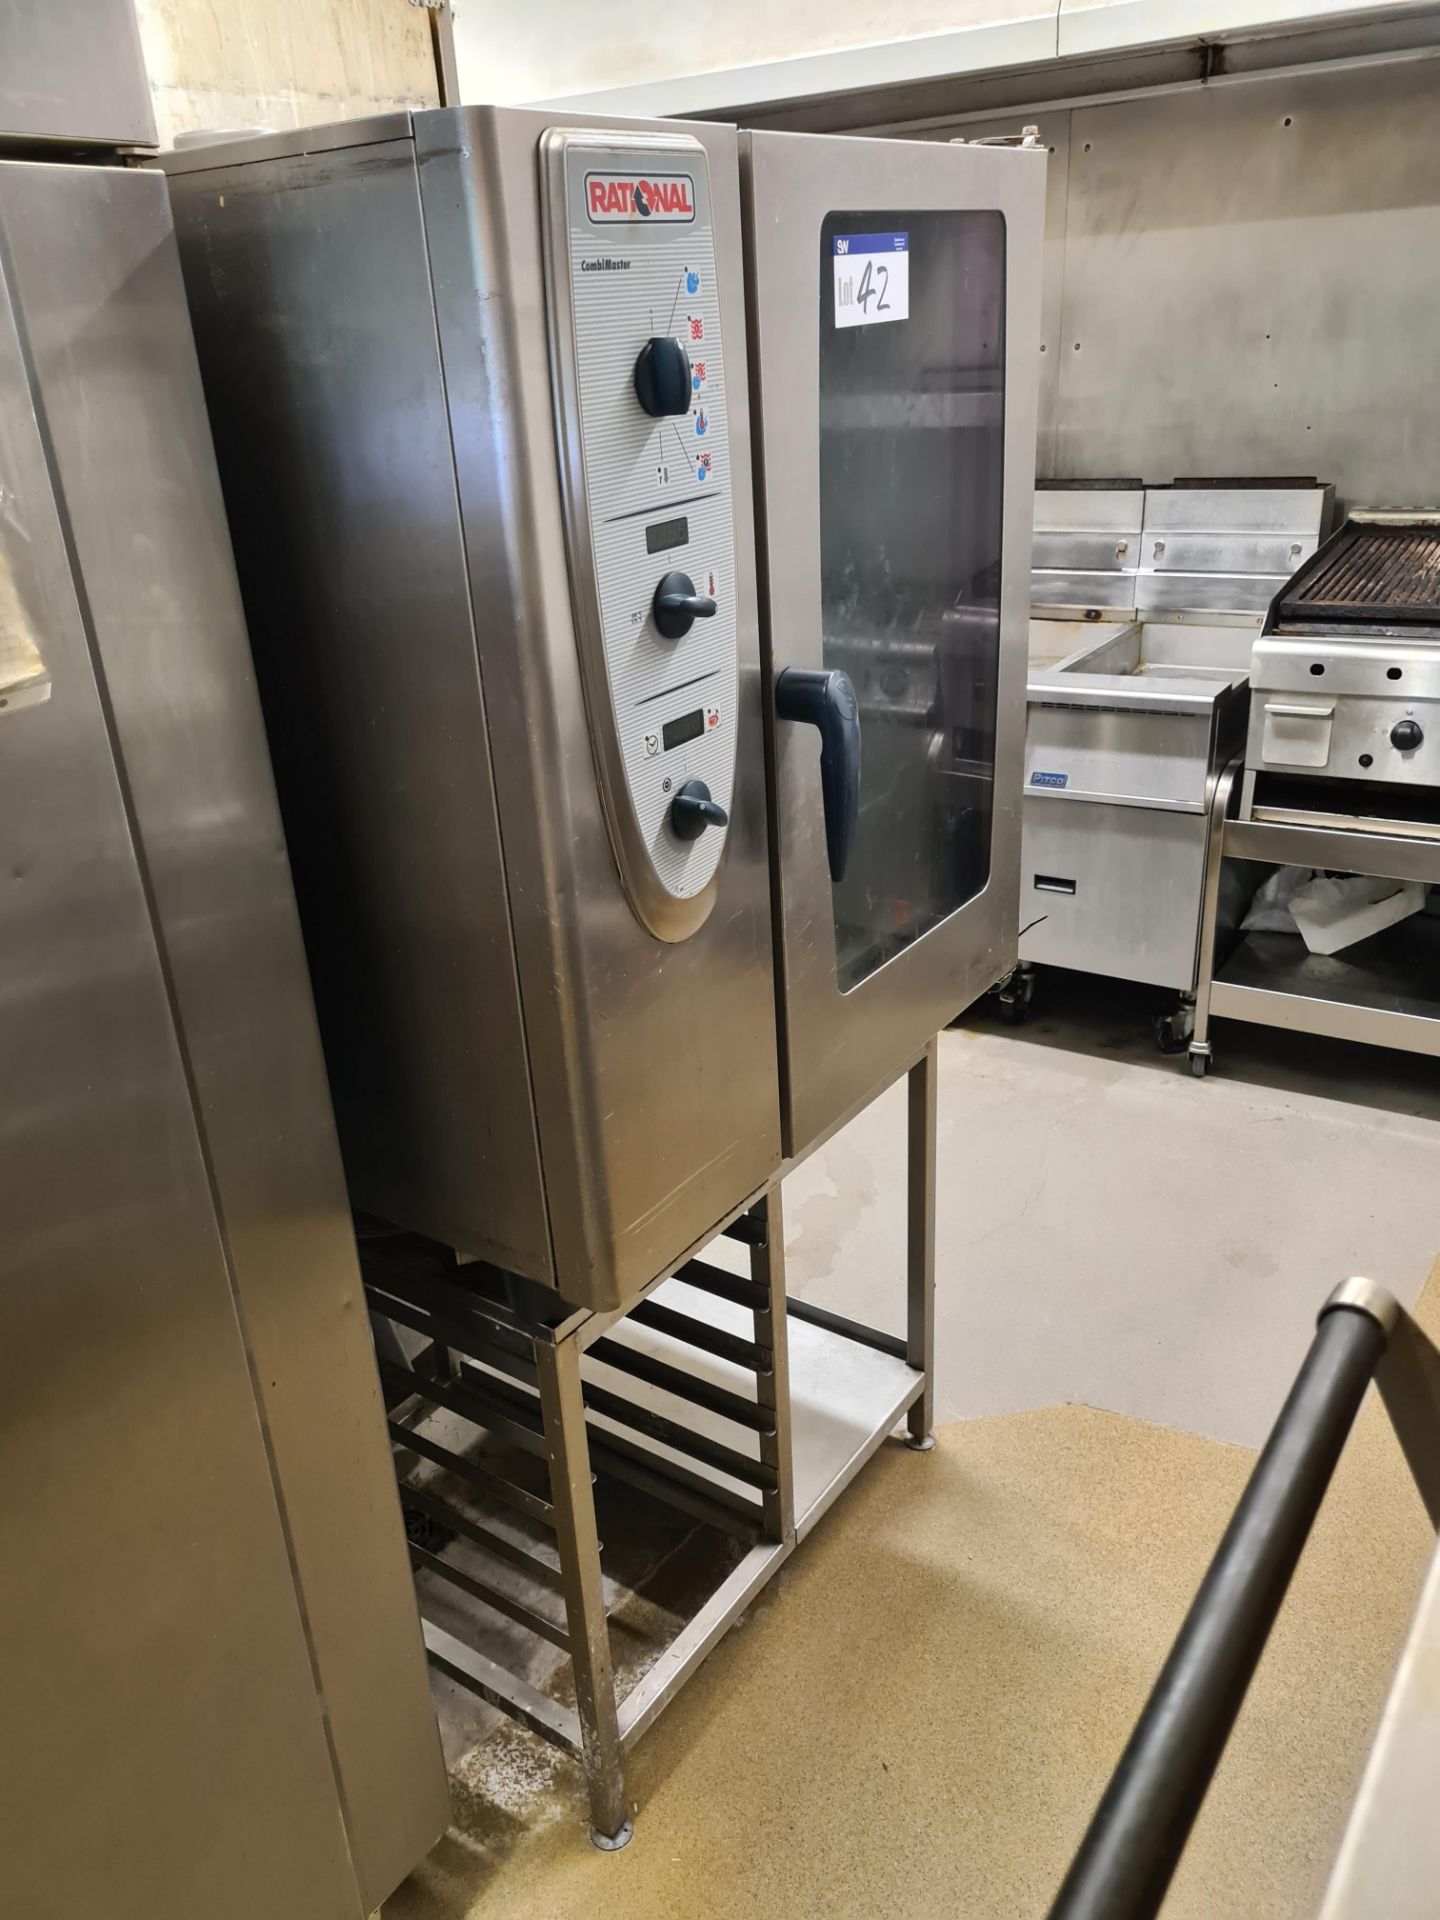 RATIONAL CombiMaster Stainless Steel Combination Oven c/w stand (415v) (Gas Needs Disconnecting - Image 3 of 5